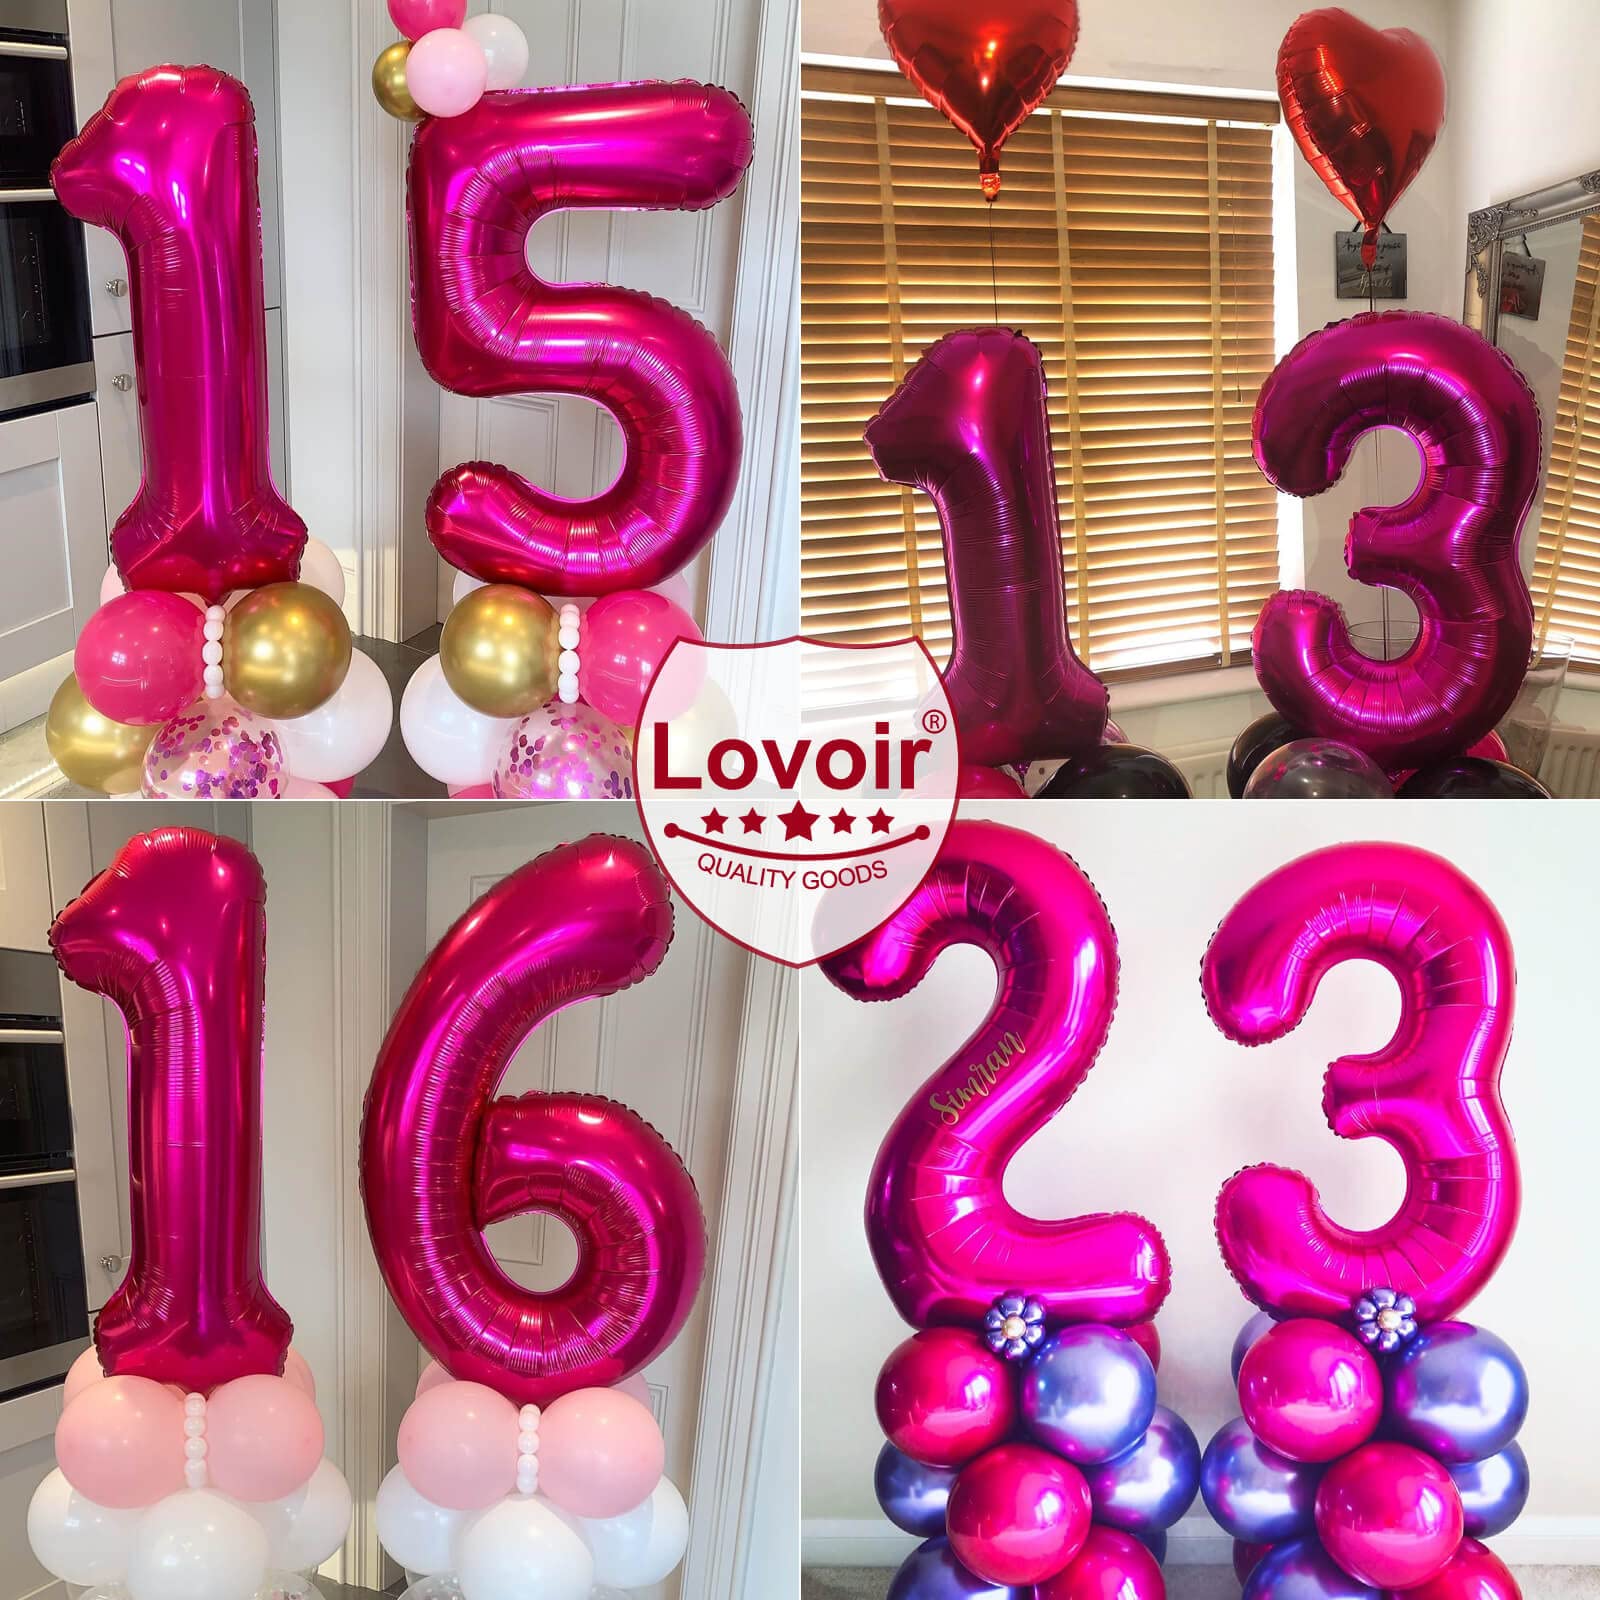 40 Inch Hot Pink Number 4 Balloon Large Size Jumbo Digit Mylar Foil Helium Bright Pink Balloons for Birthday Party Celebration Decorations Graduations Anniversary Baby Shower Photo Shoot